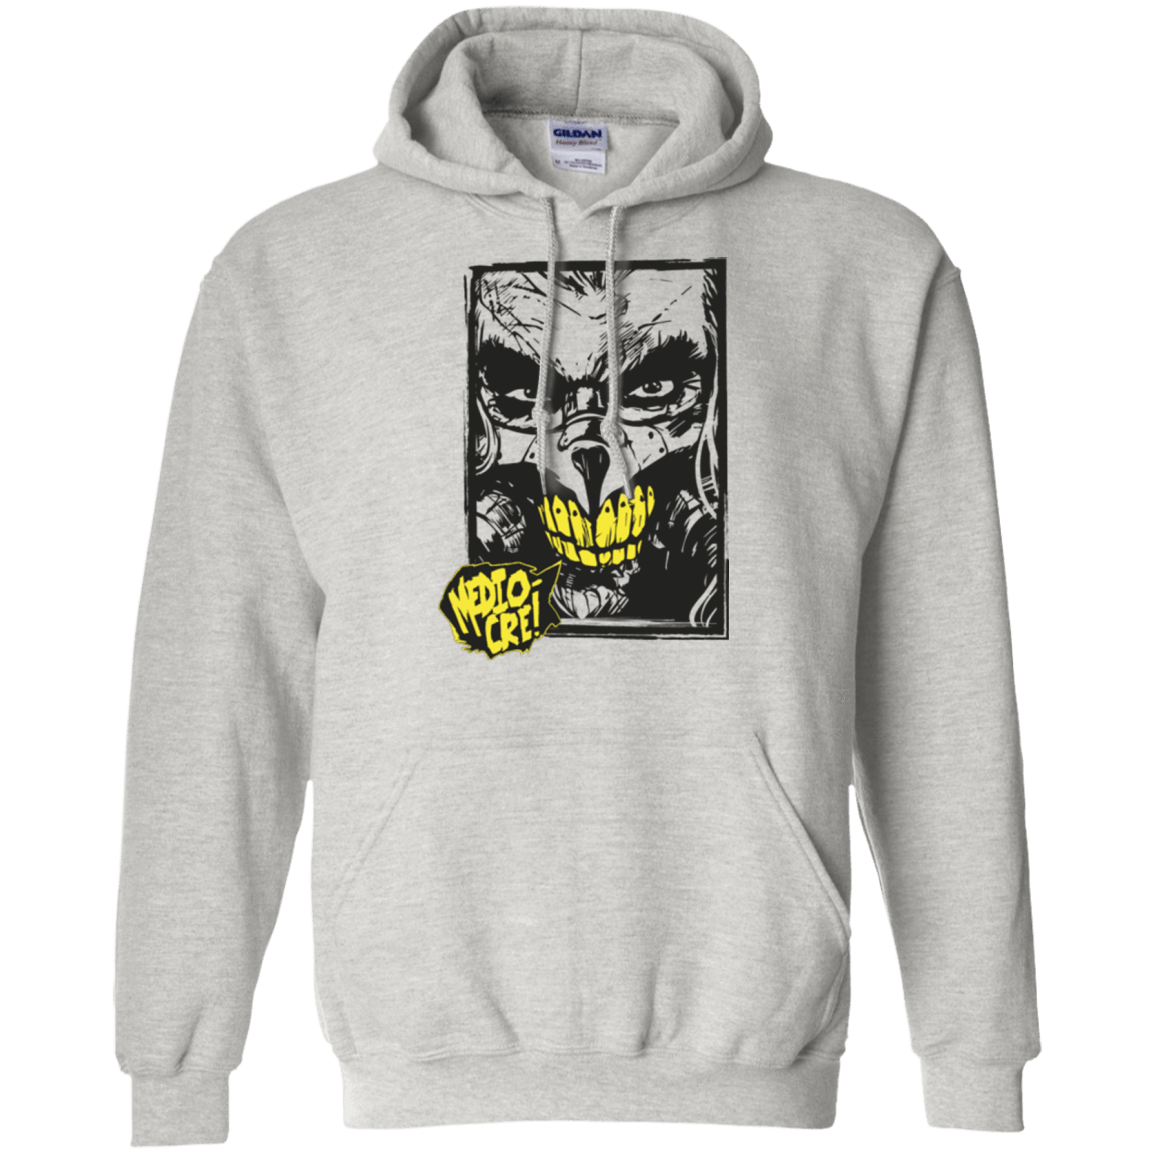 Sweatshirts Ash / Small Mediocre Pullover Hoodie